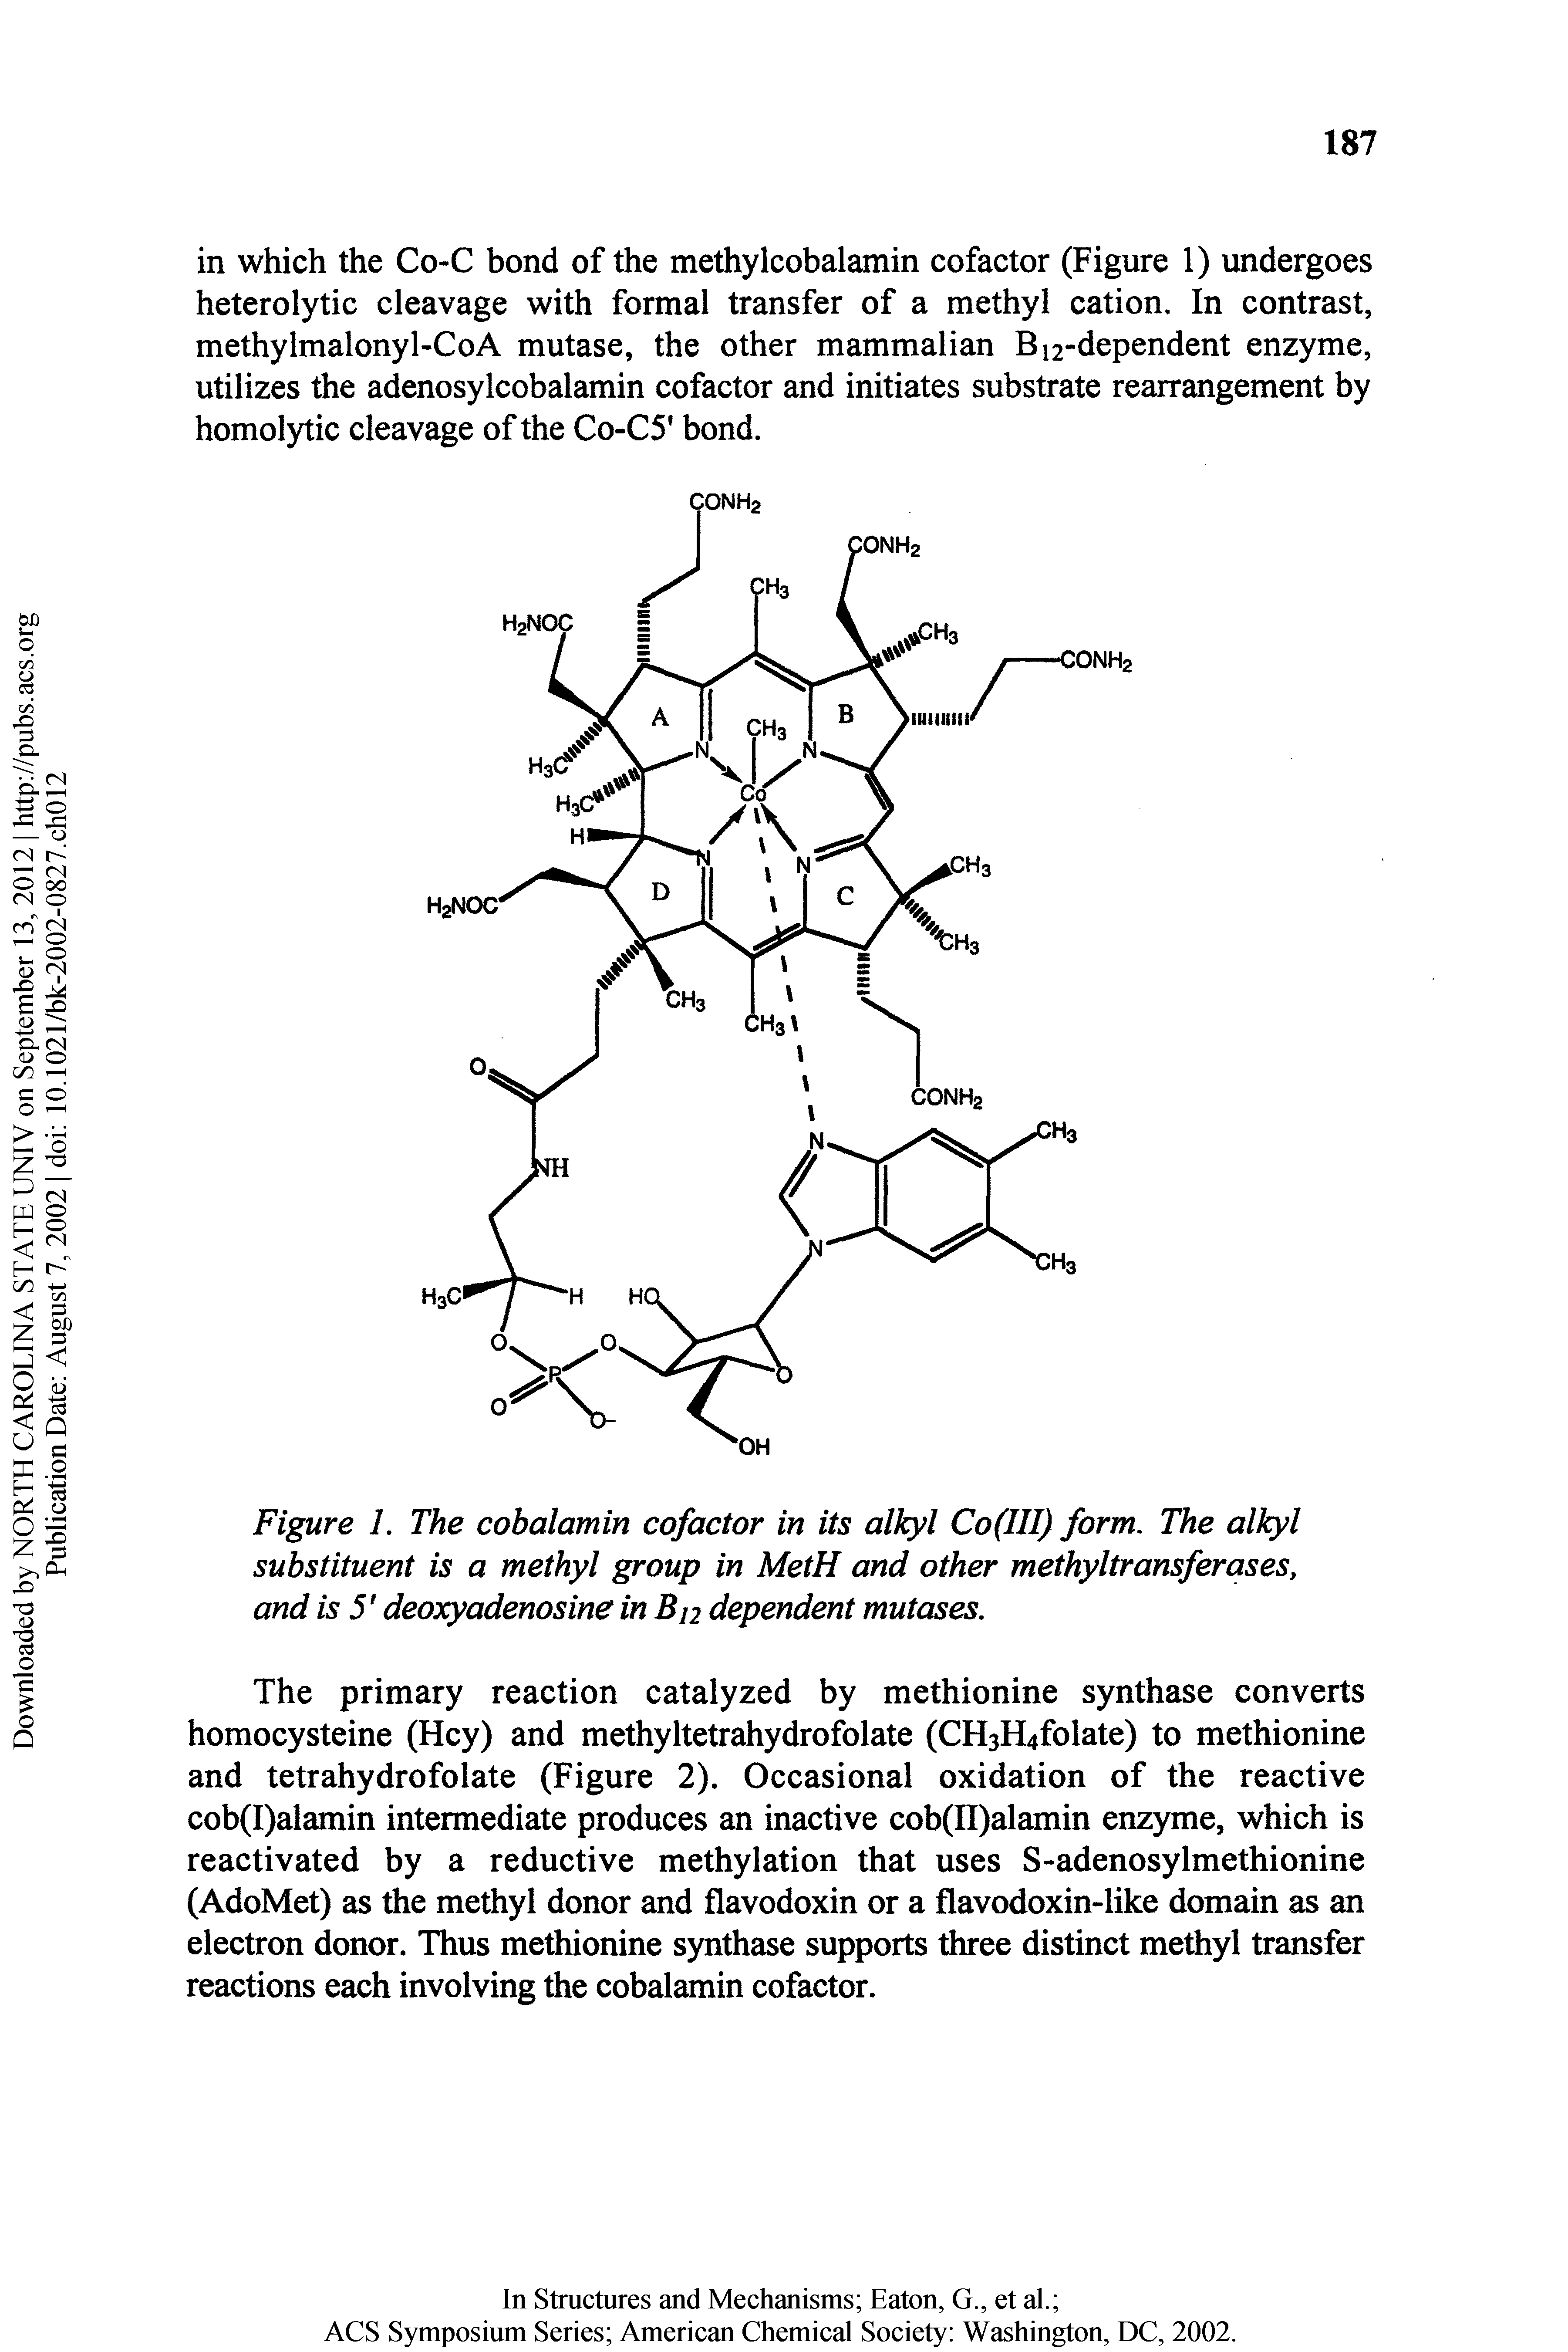 Figure 1. The cobalamin cofactor in its alkyl Co(III) form. The alkyl substituent is a methyl group in MetH and other methyltransferases, and is 5 deoxyadenosine in Bj2 dependent mutases.